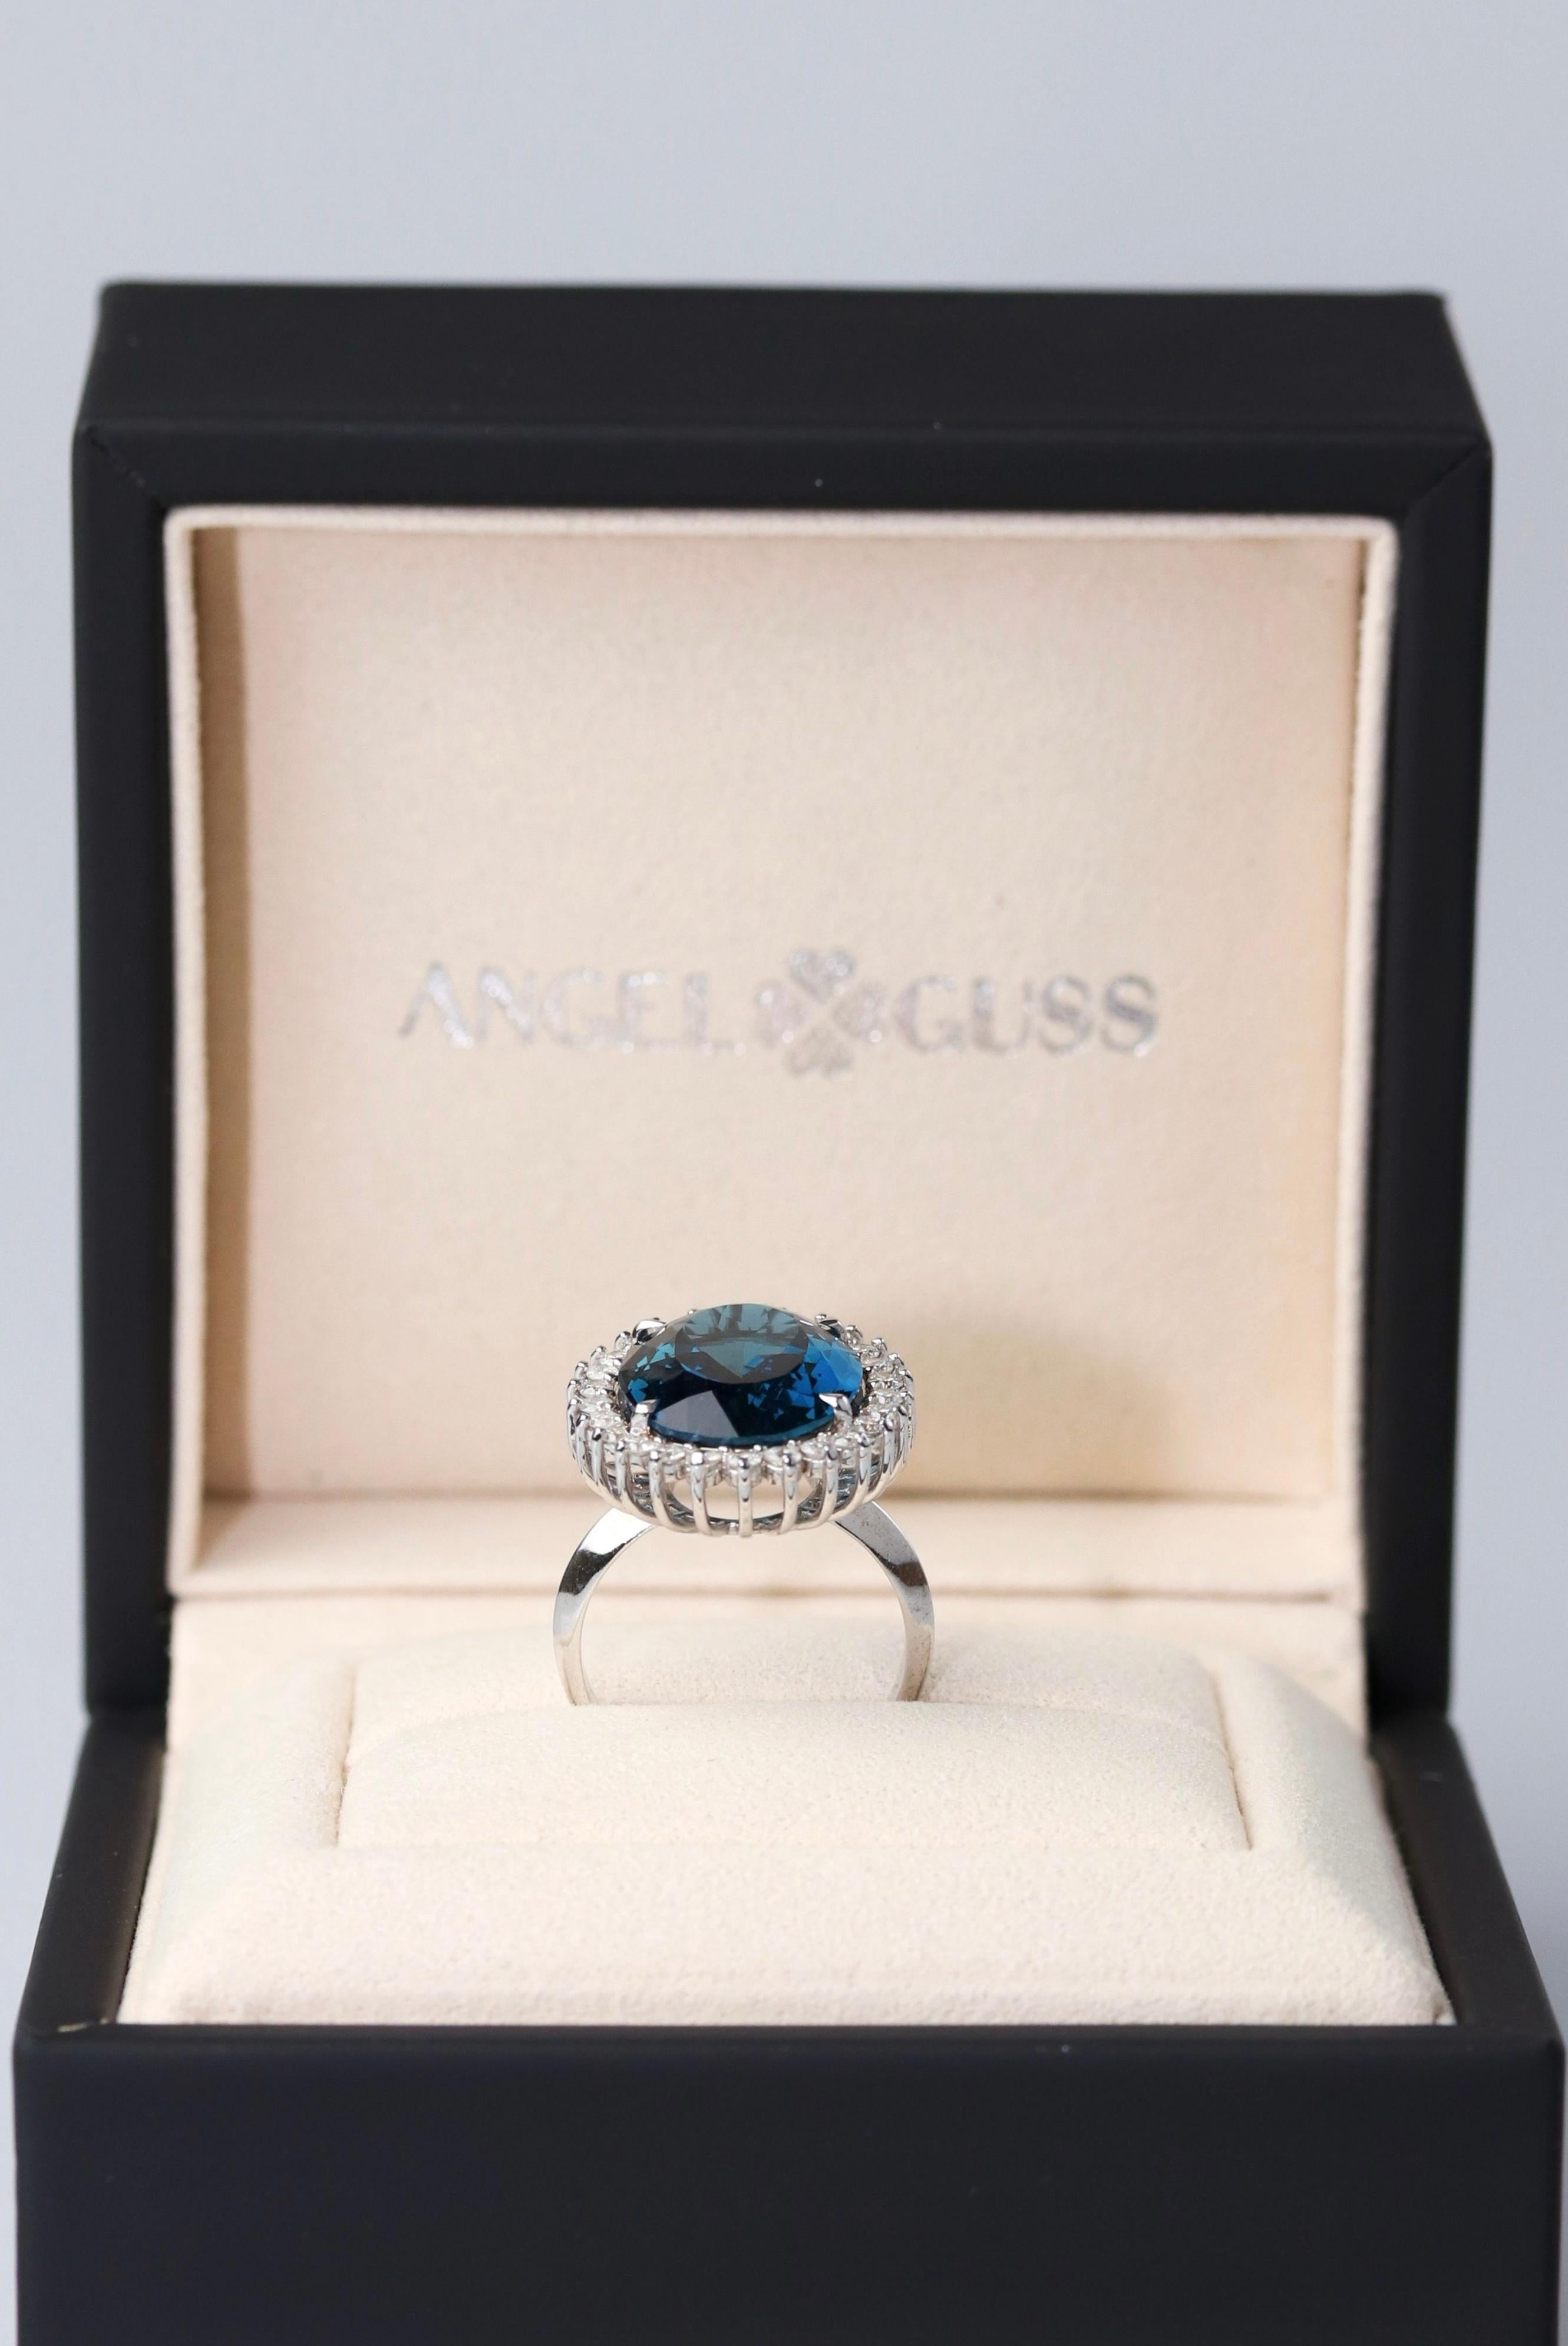 18K Solid White Gold

Natural Diamonds

Natural London Swiss Topaz Gemstone: Oval shape, Size 14,8 x 19,6mm


This beautiful ring draws inspiration from the timeless elegance of Princess Diana's iconic piece. At its heart lies a dazzling London